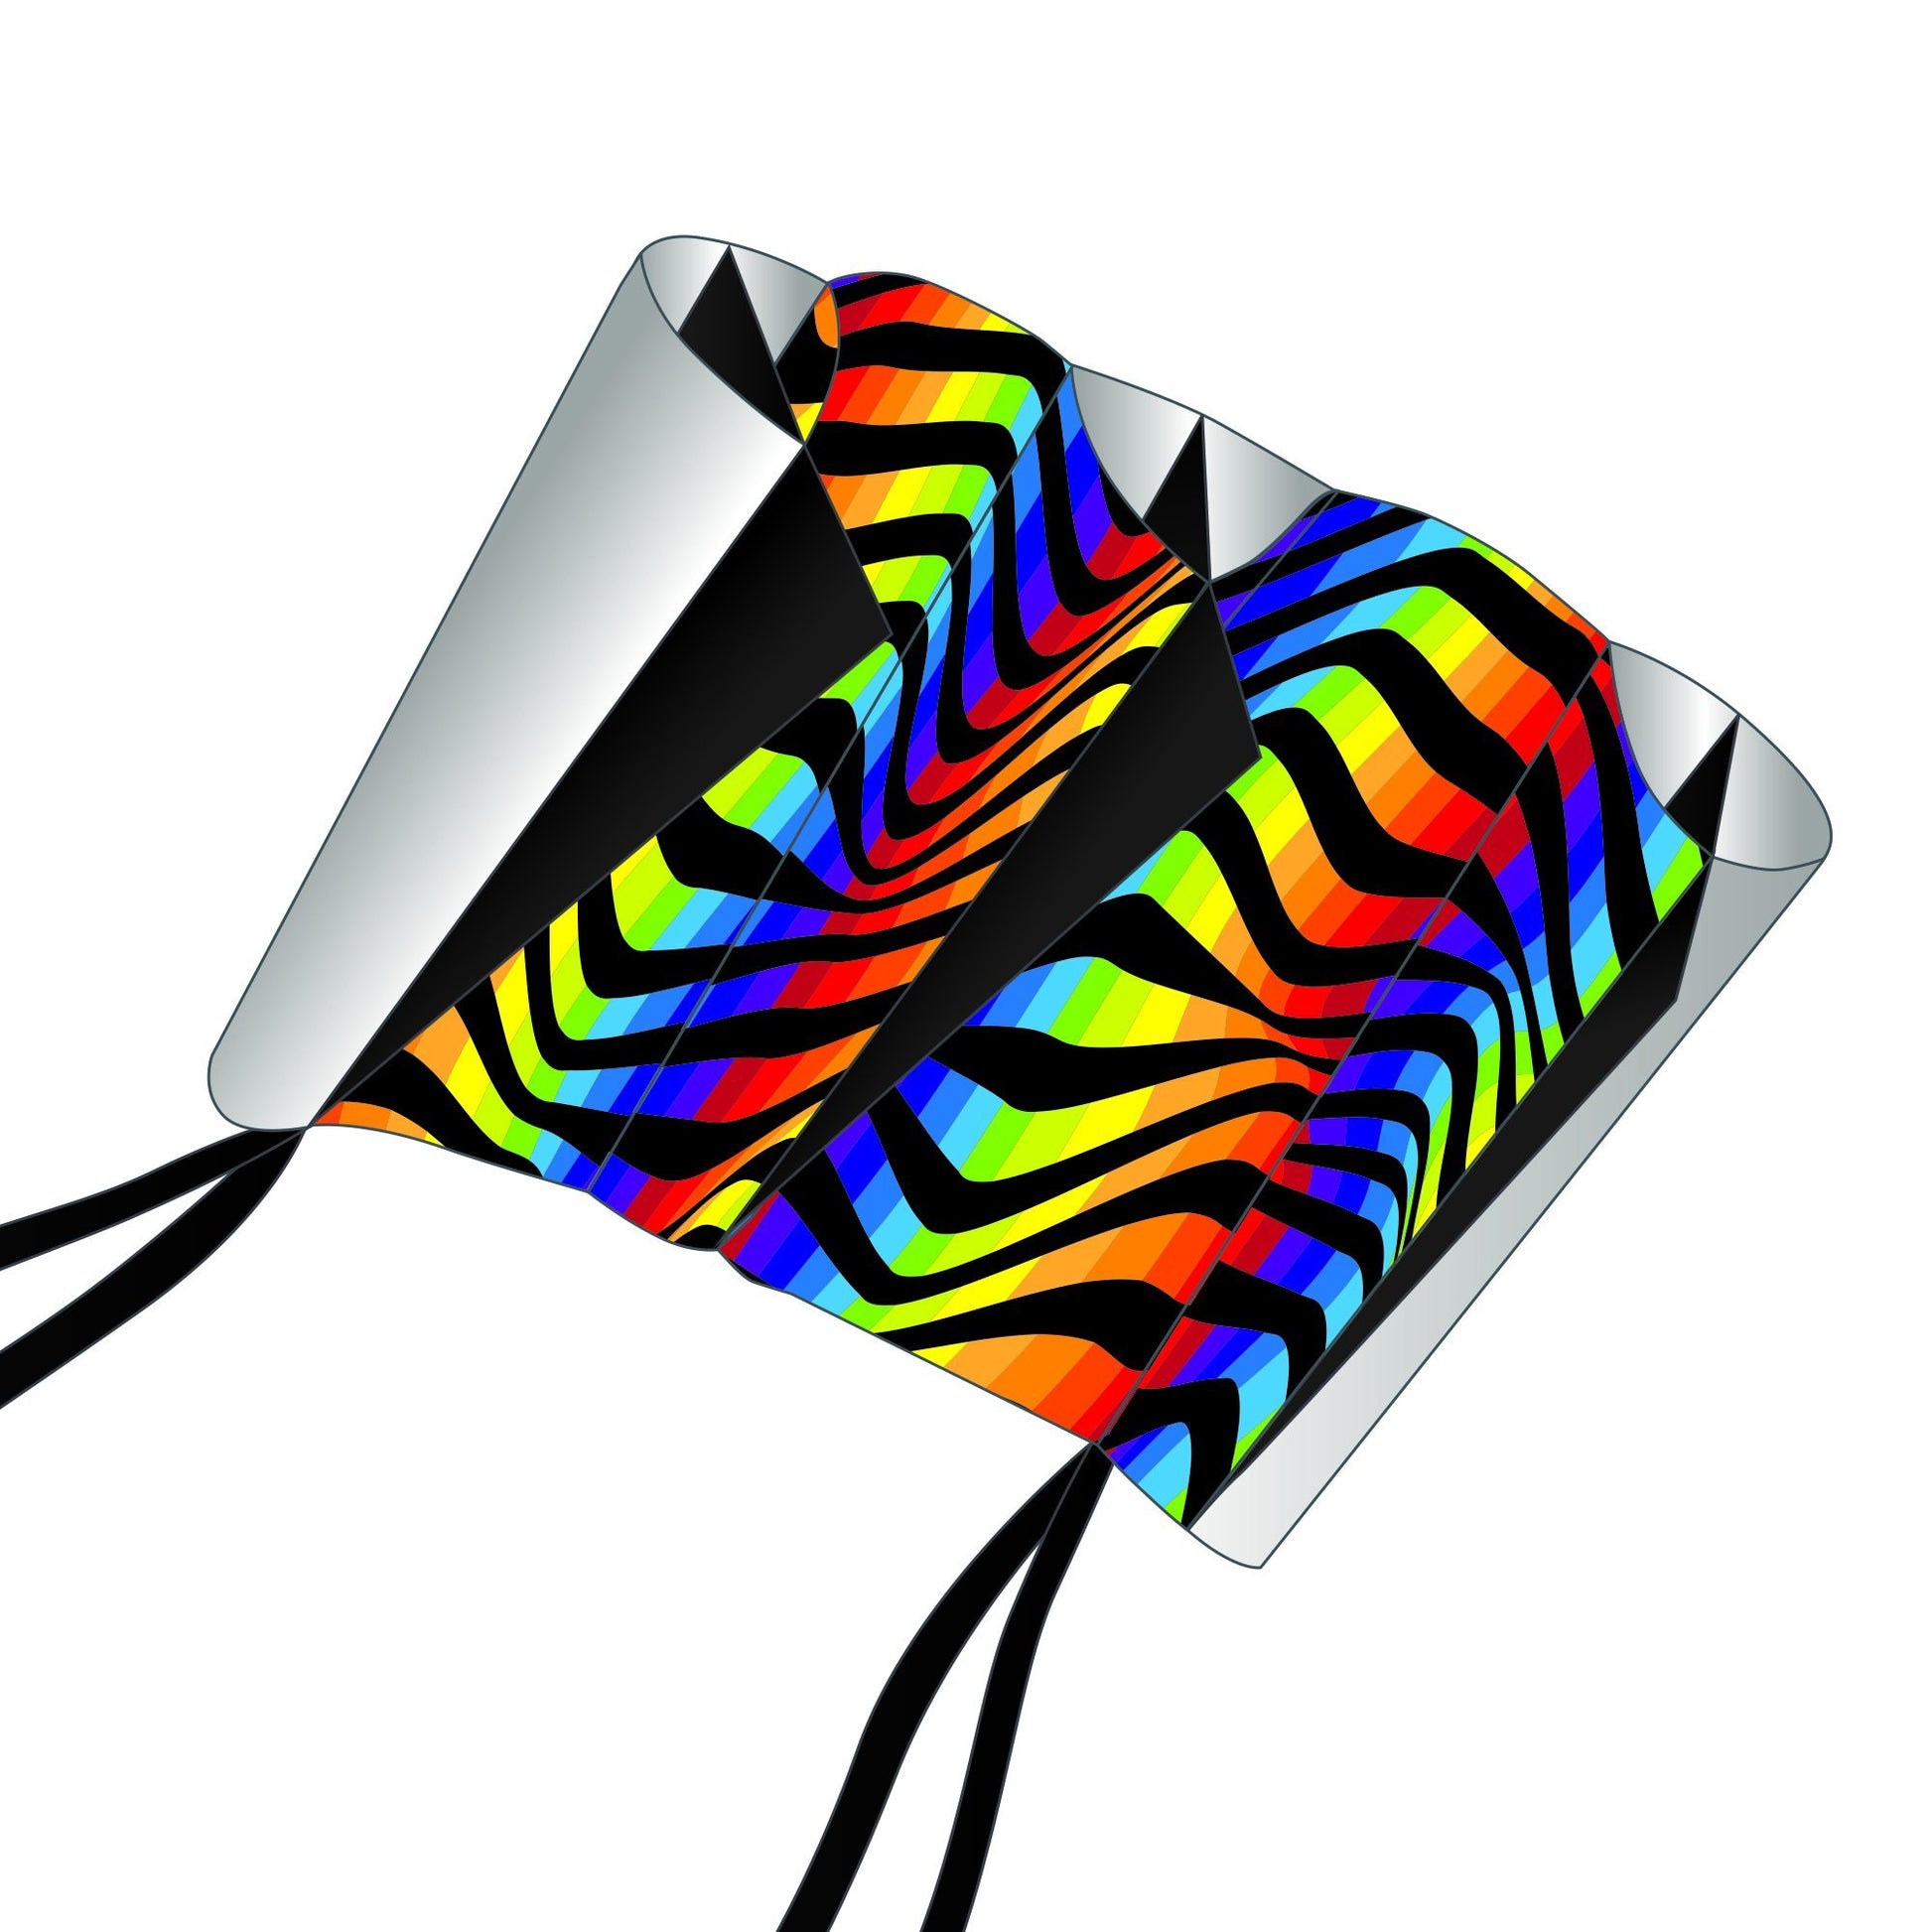 X Kites SkyFoil Waves + Pocket Kite Void Parafoil Kite Bundle - No Assembly Required Product Image